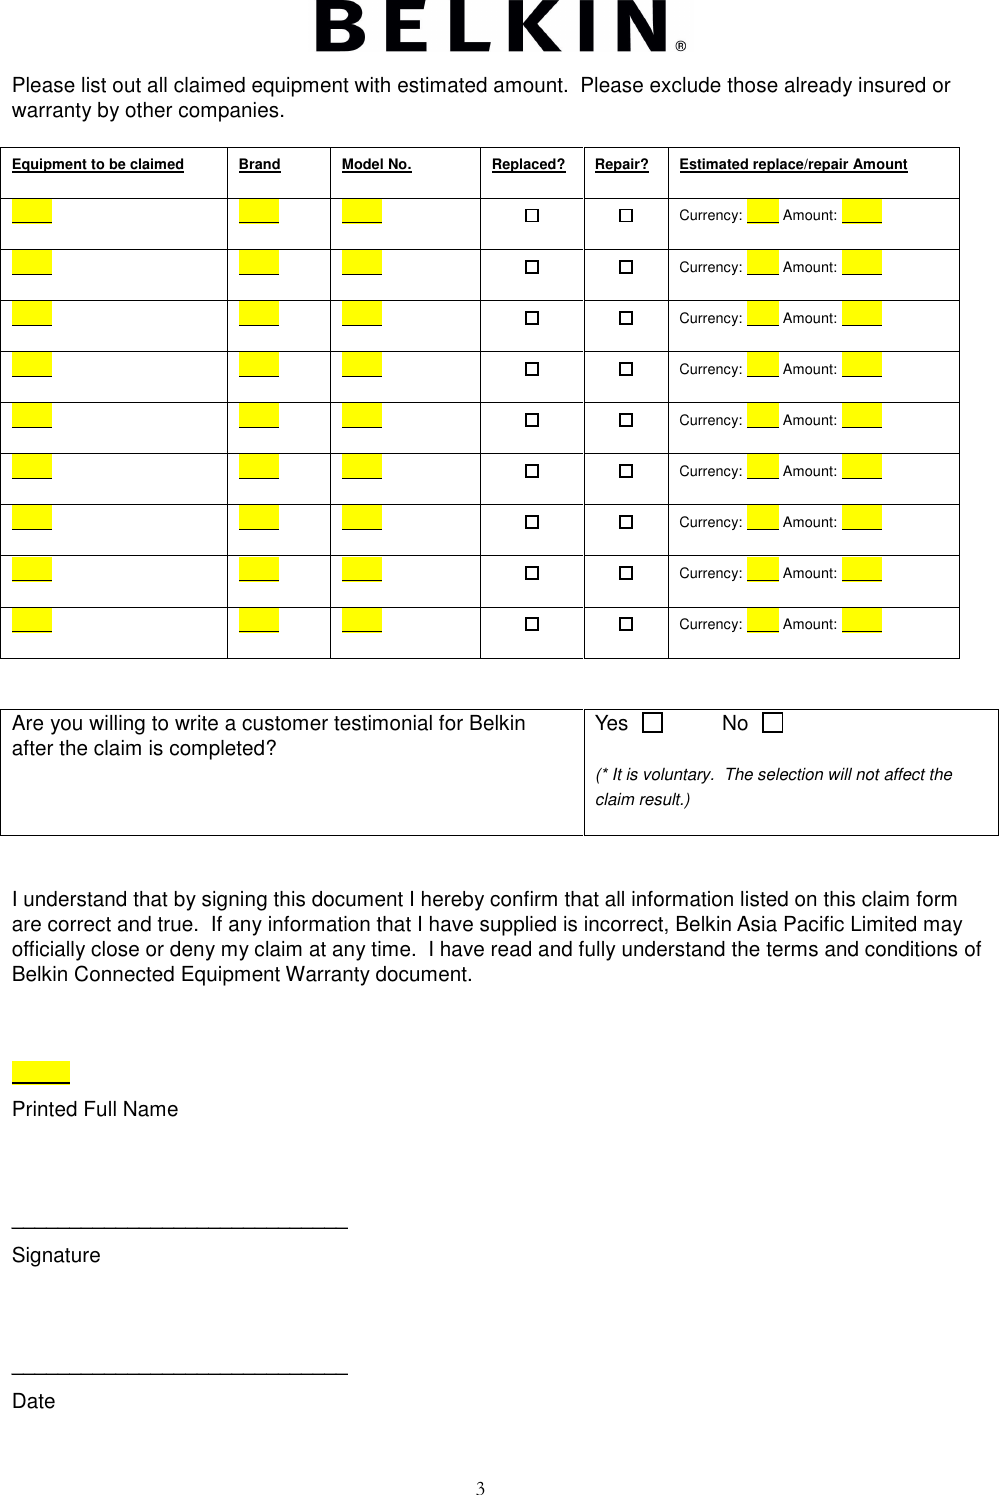 Page 3 of 3 - CEW Form  APAC Forms